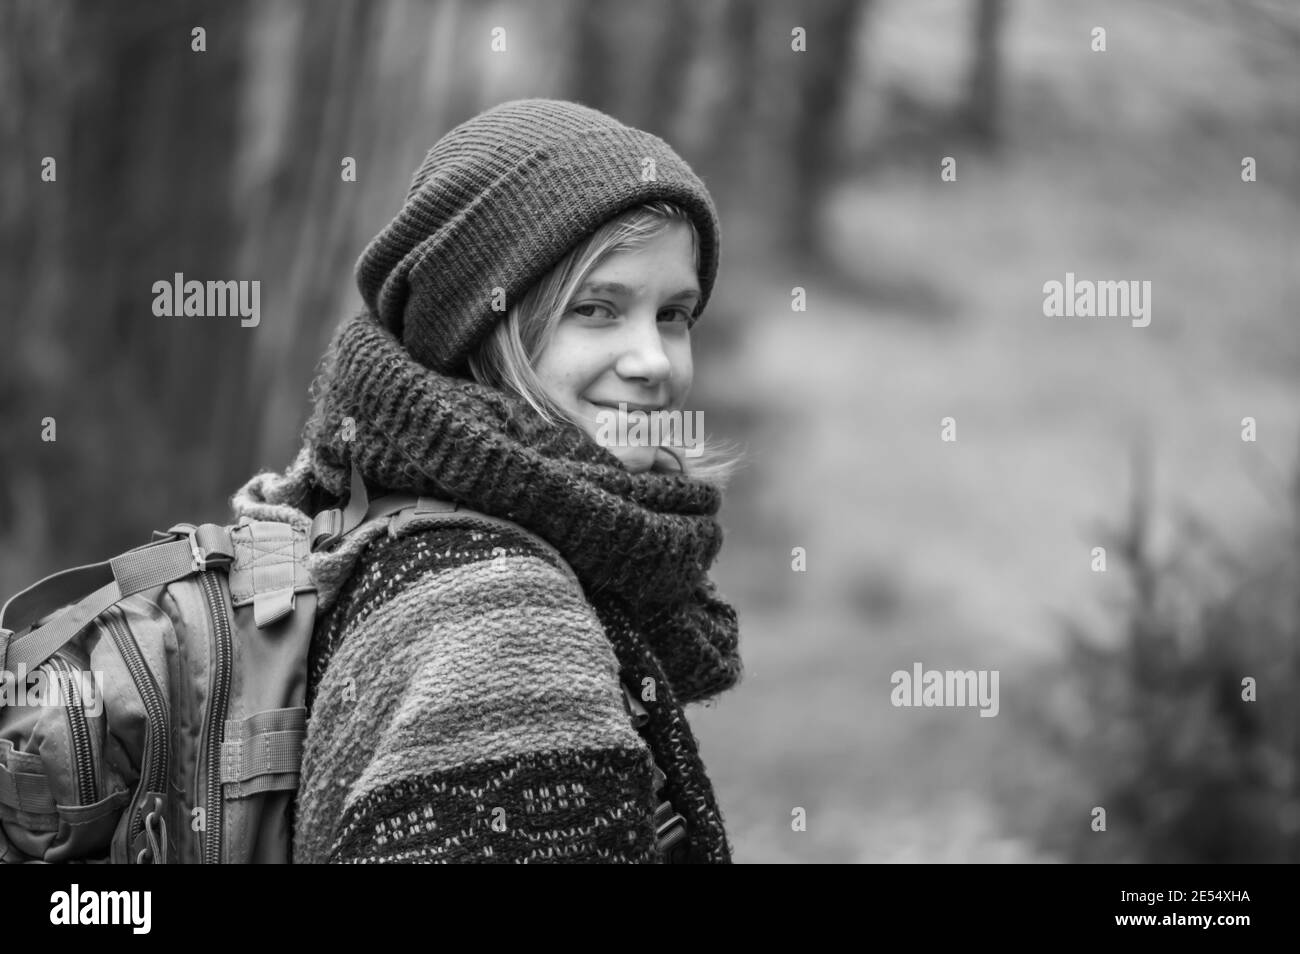 Black and white portrait of a young woman with layers of heavy winter clothes, wool scarf and hat looking at camera and smiling during a country hike. Stock Photo